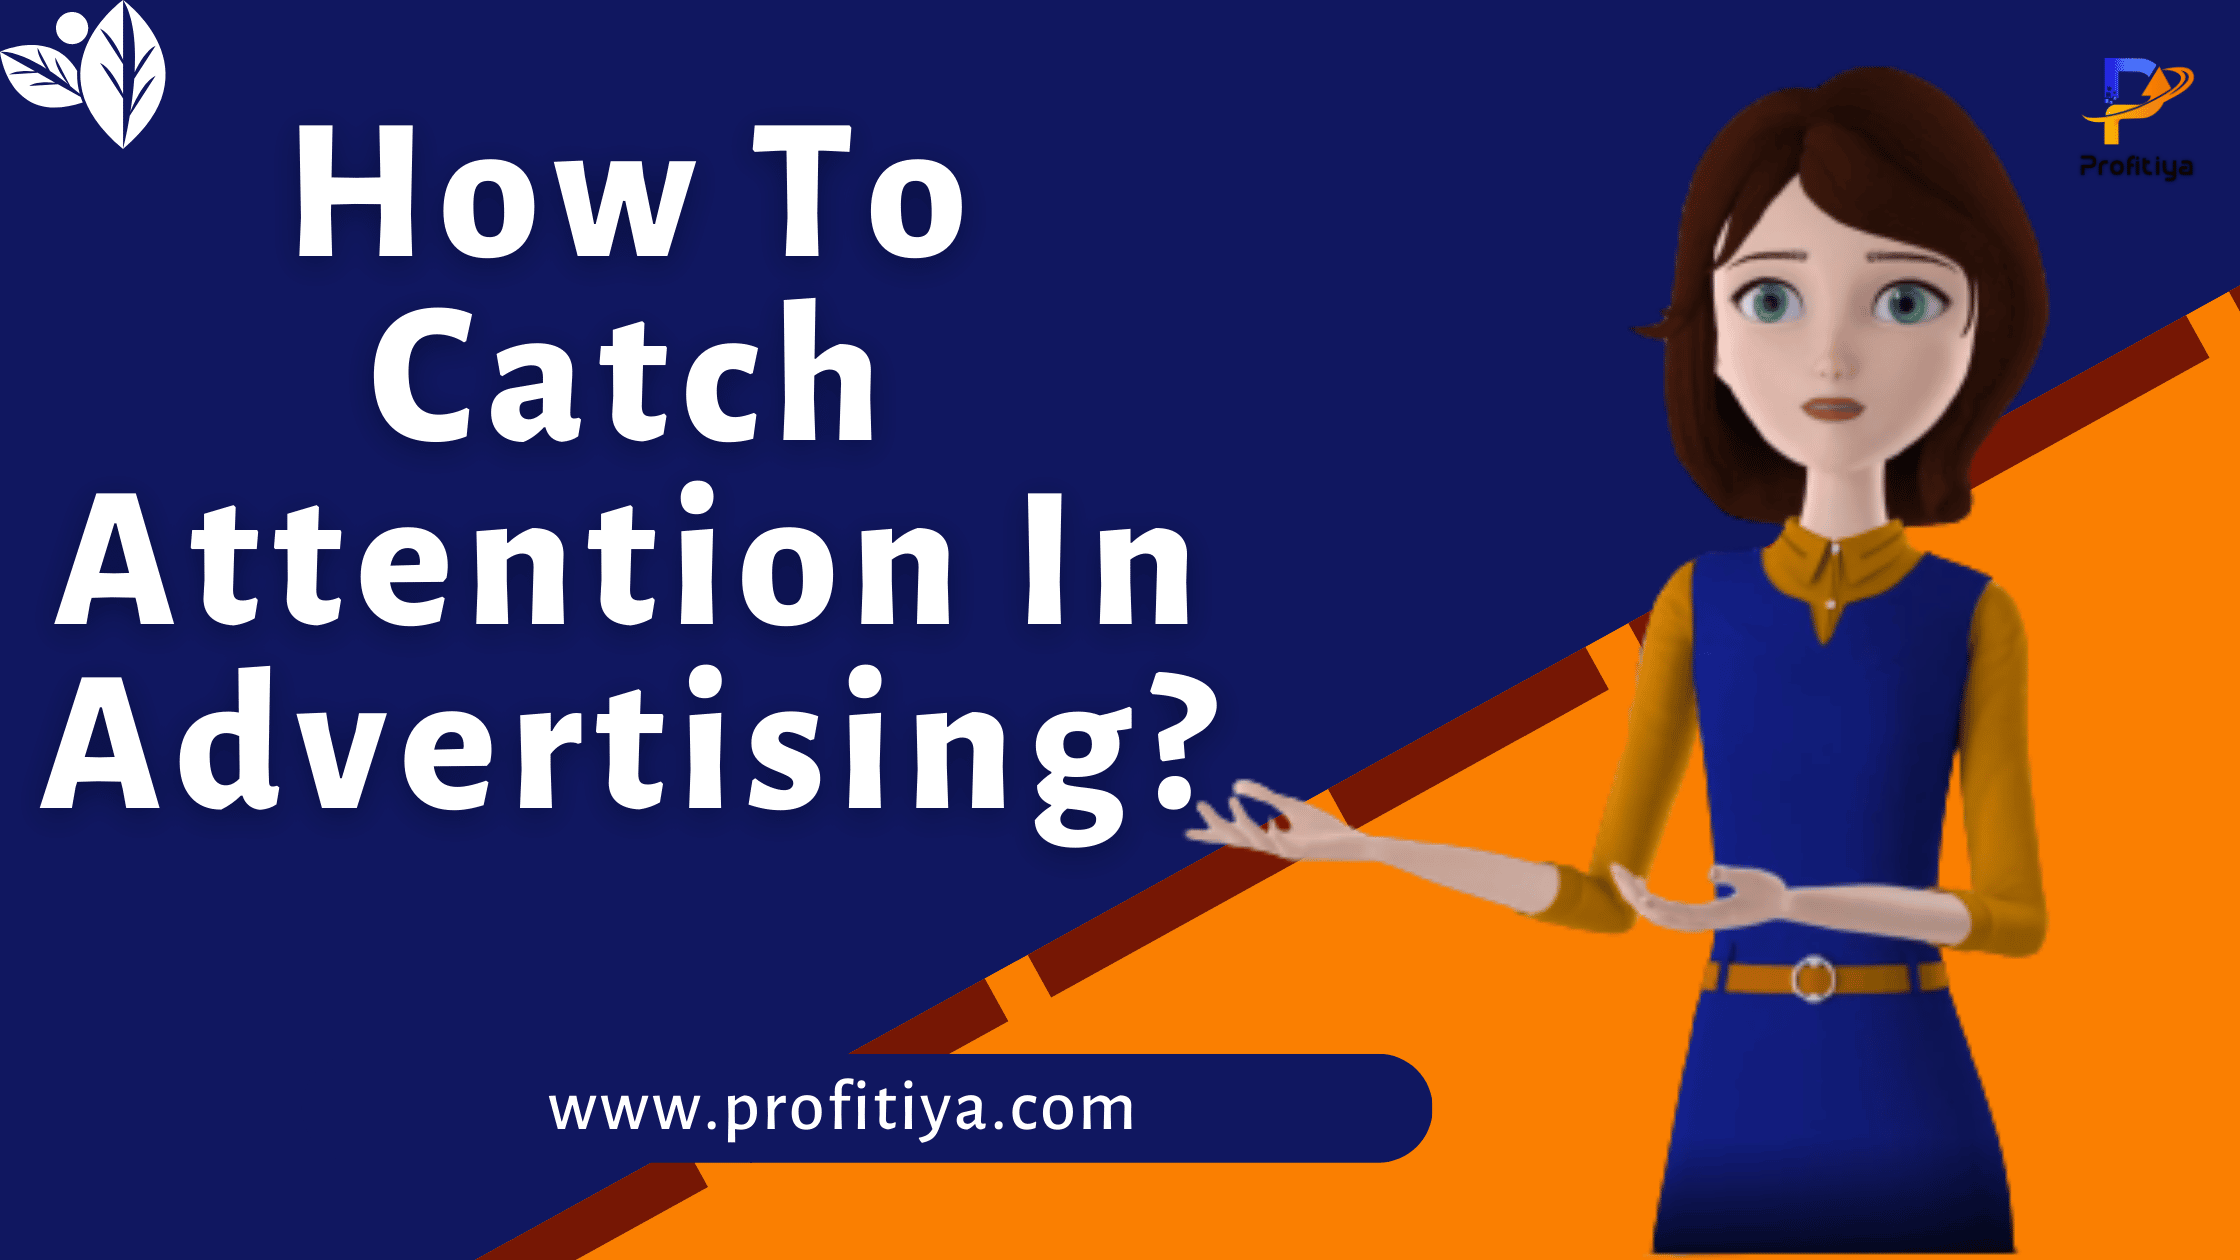 How To Catch Attention In Advertising?